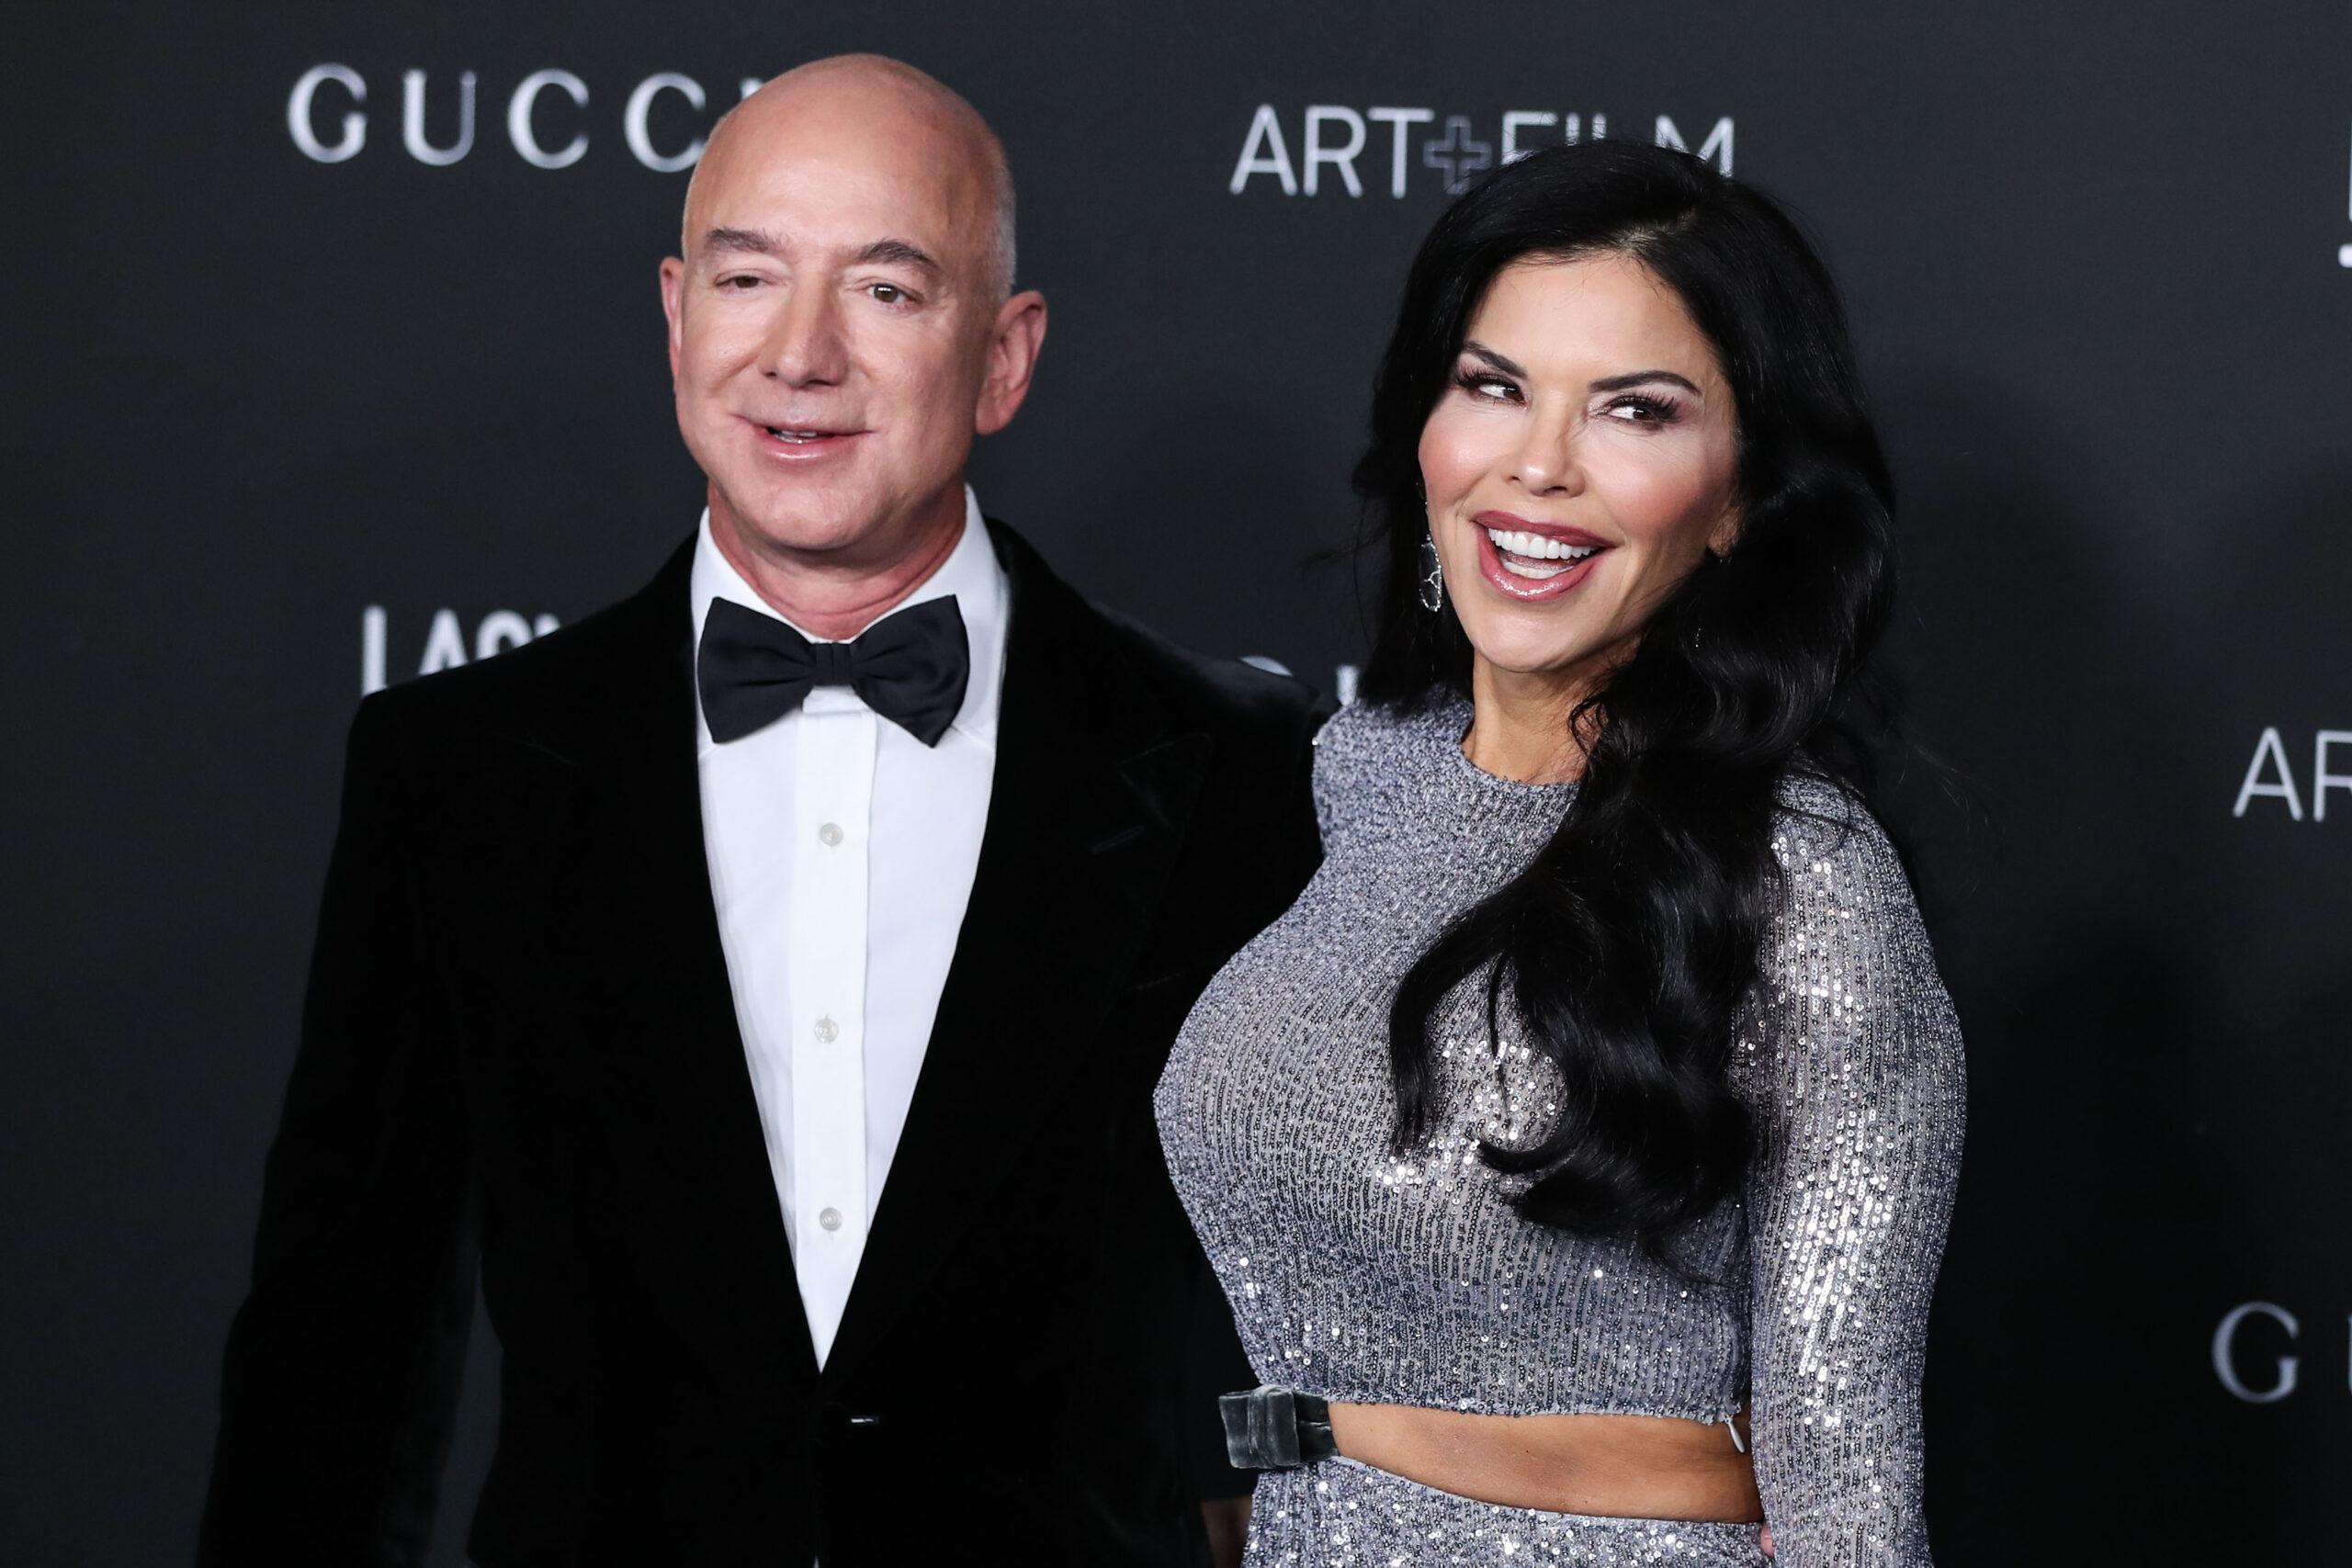 Jeff Bezos and girlfriend/American news anchor Lauren Sanchez arrive at the 10th Annual LACMA Art + Film Gala 2021